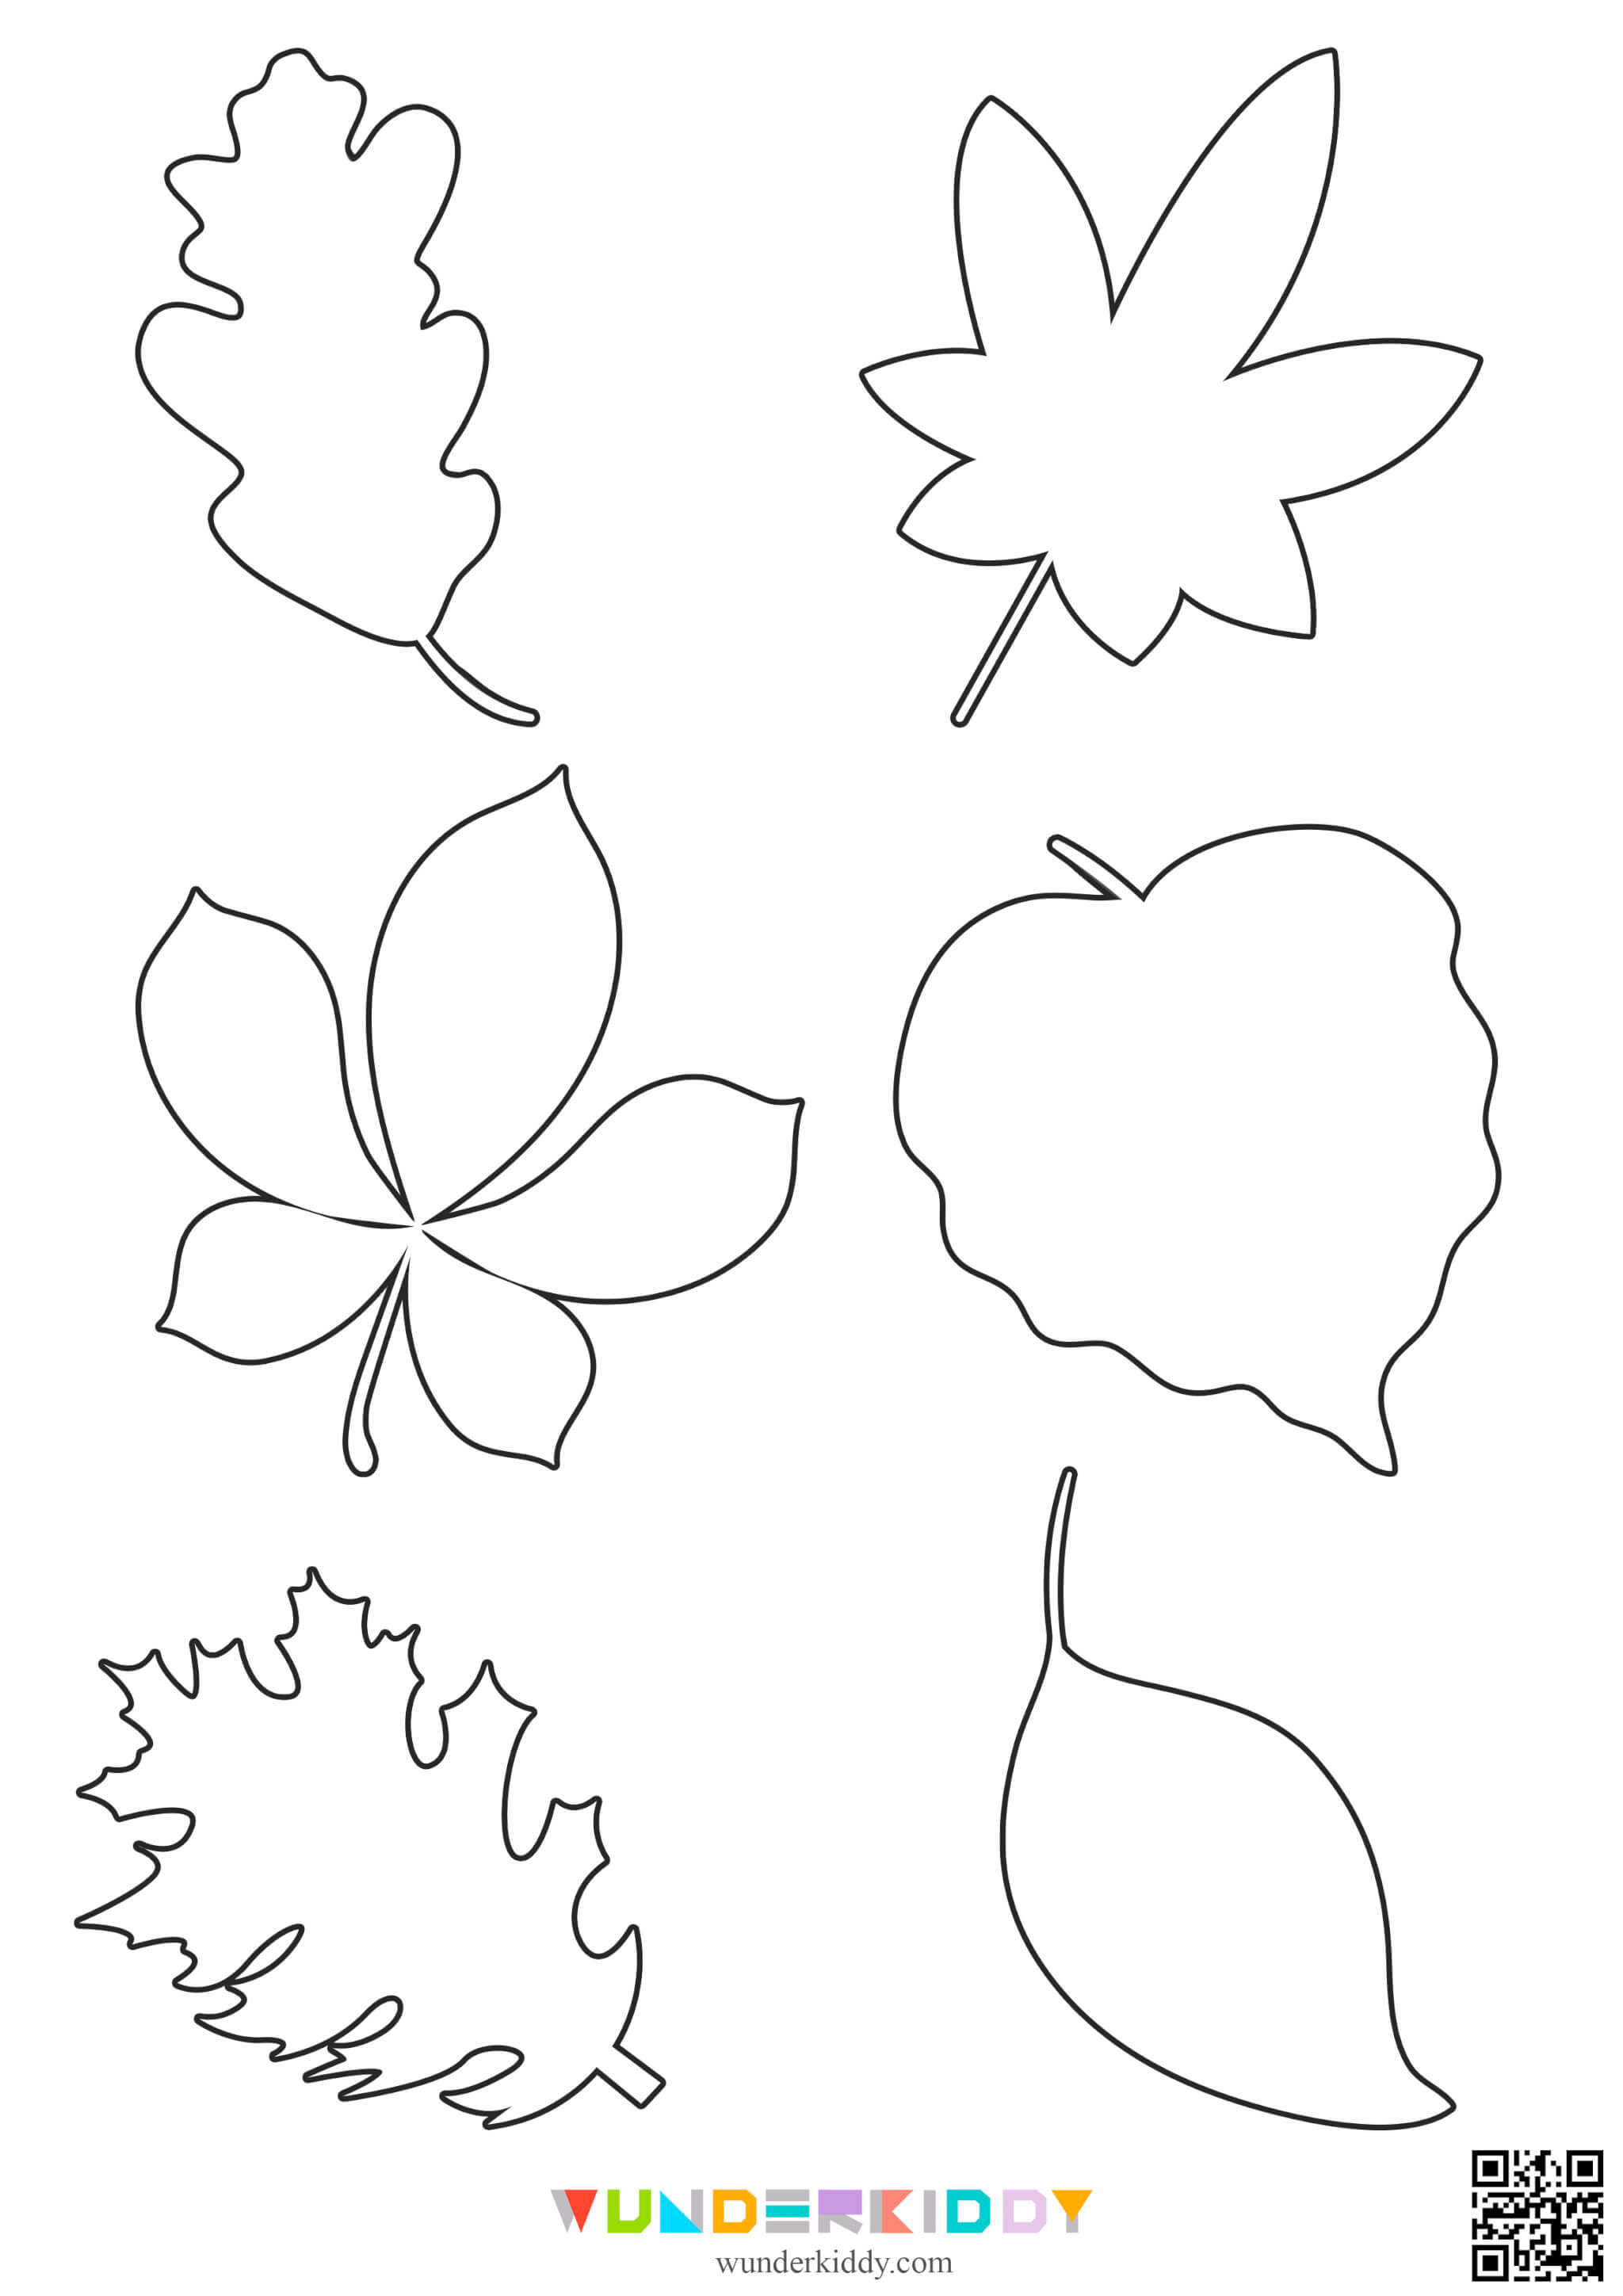 Autumn Leaves Free Outline Templates - Image 3